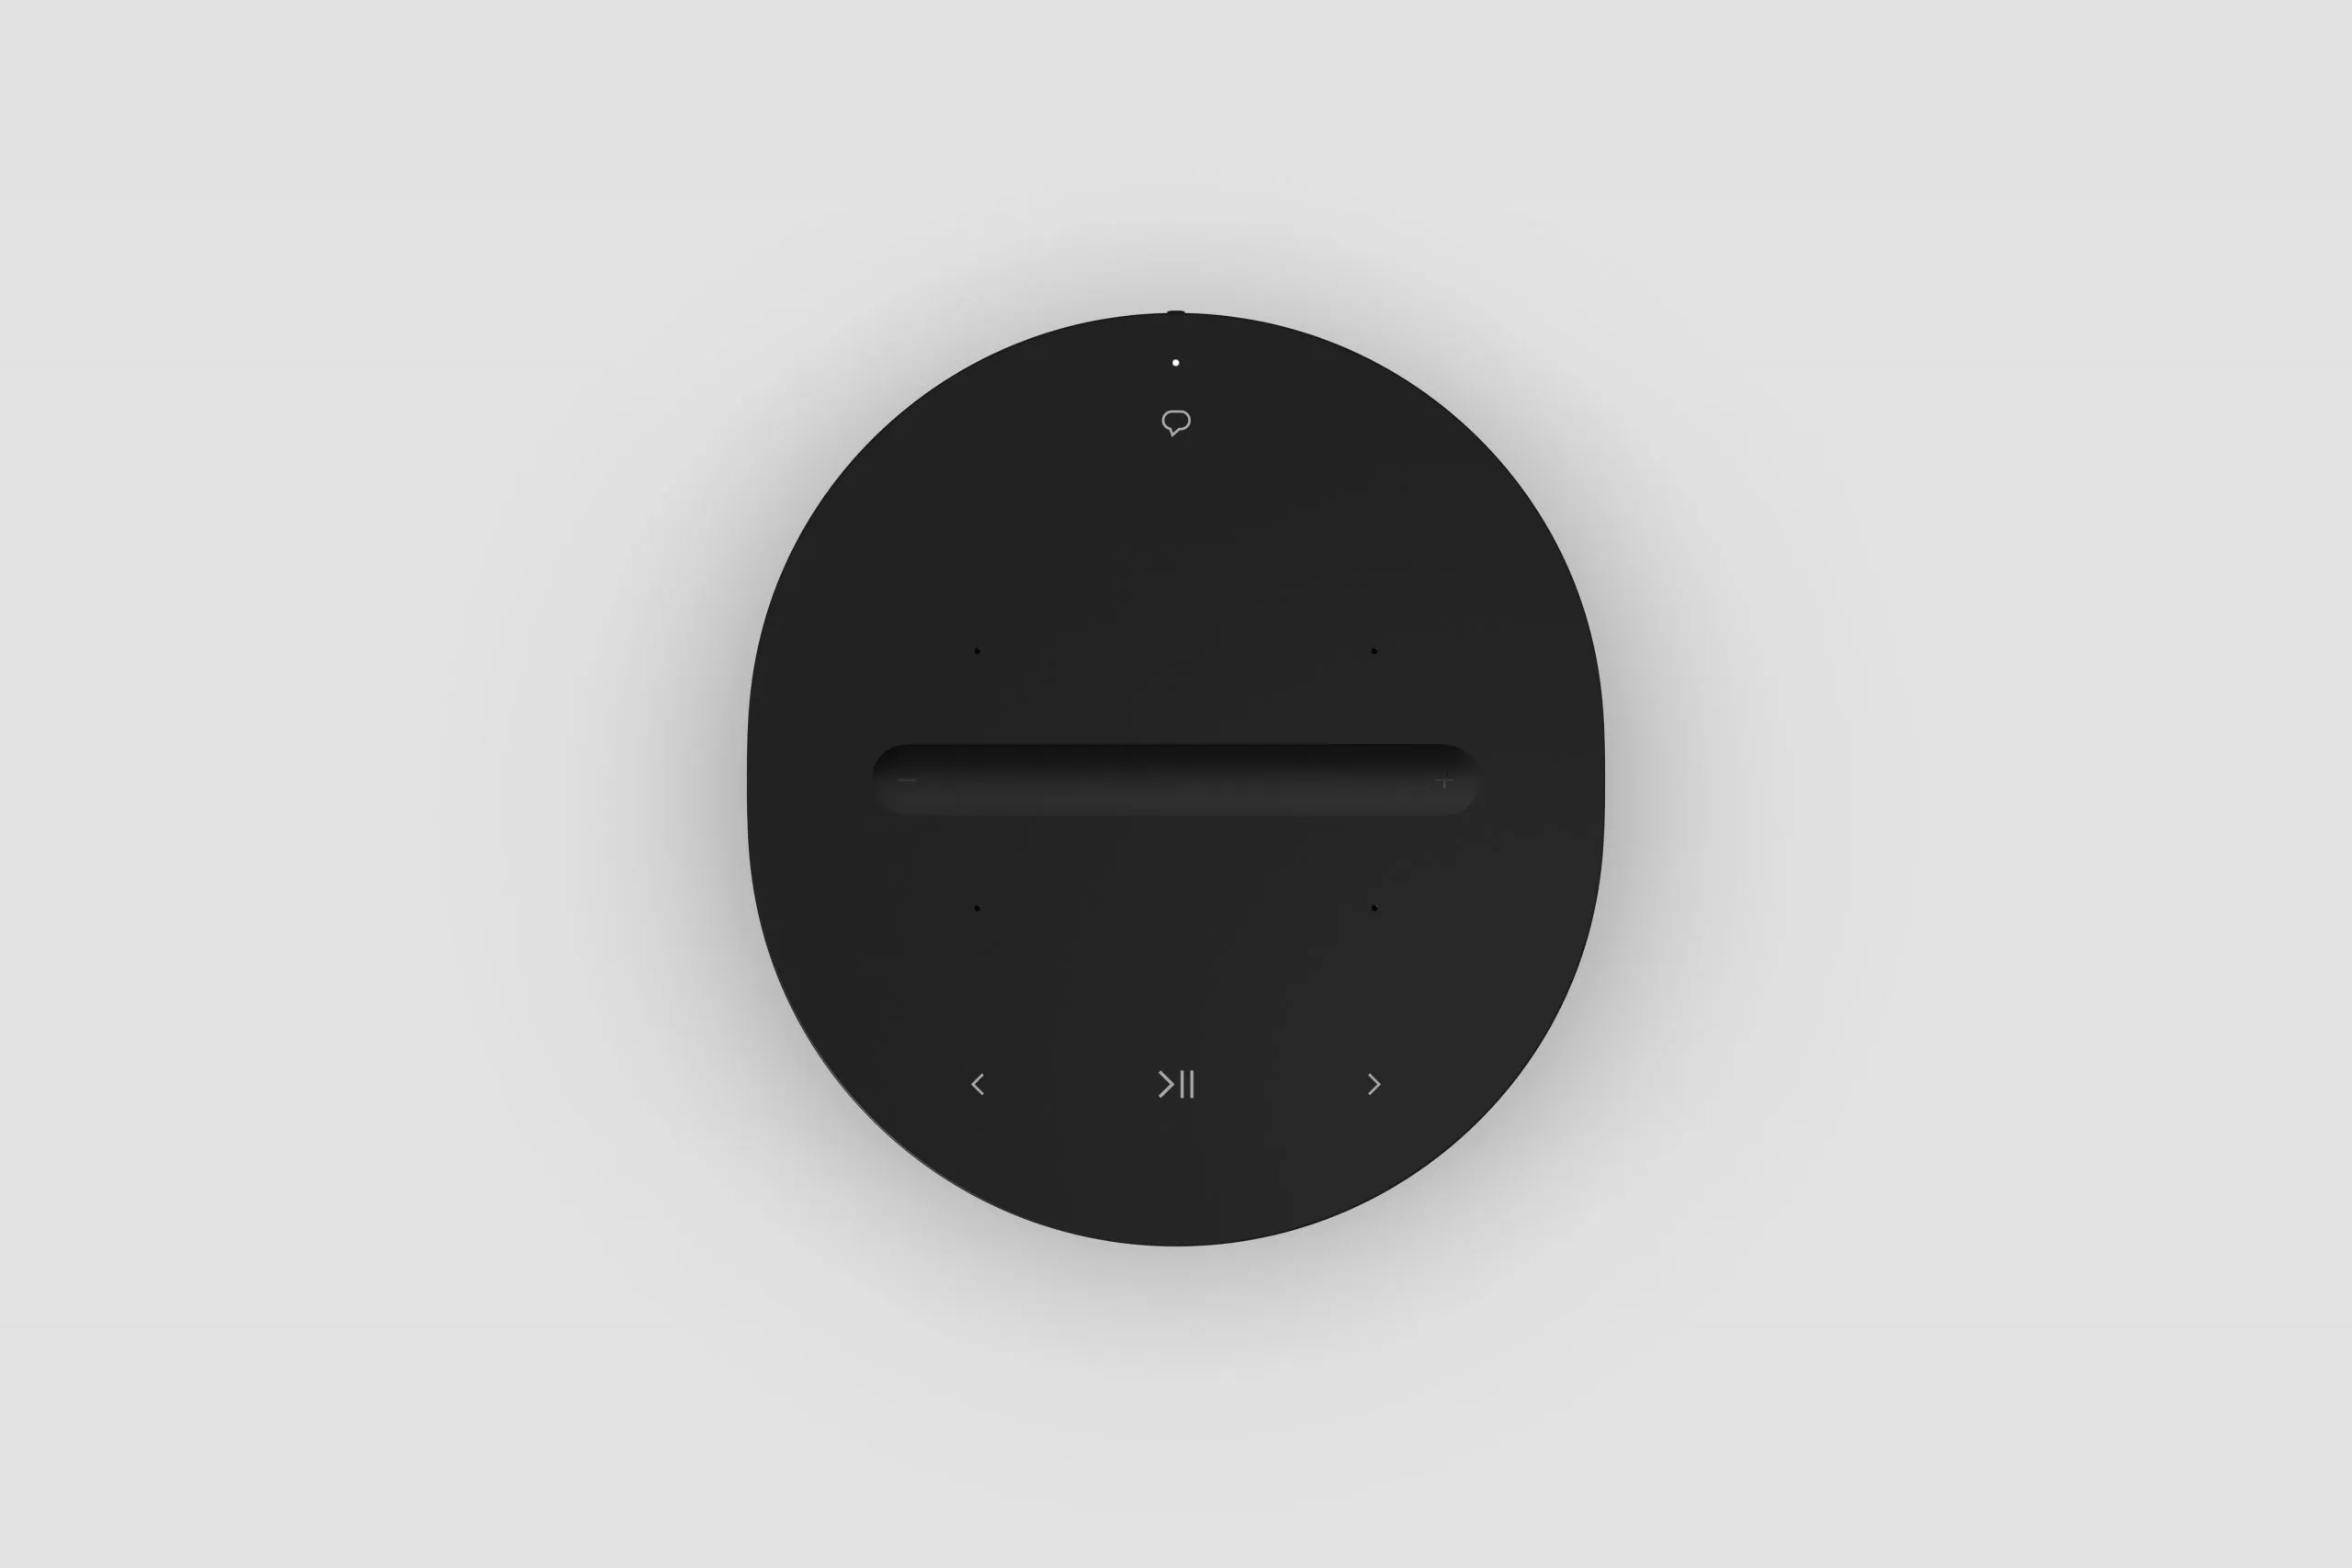 era 100 top black - Sonos Era 100 vs Sonos One Compared: Sonos One to be phased out, how is Era 100 better, and is it worth the extra £50?